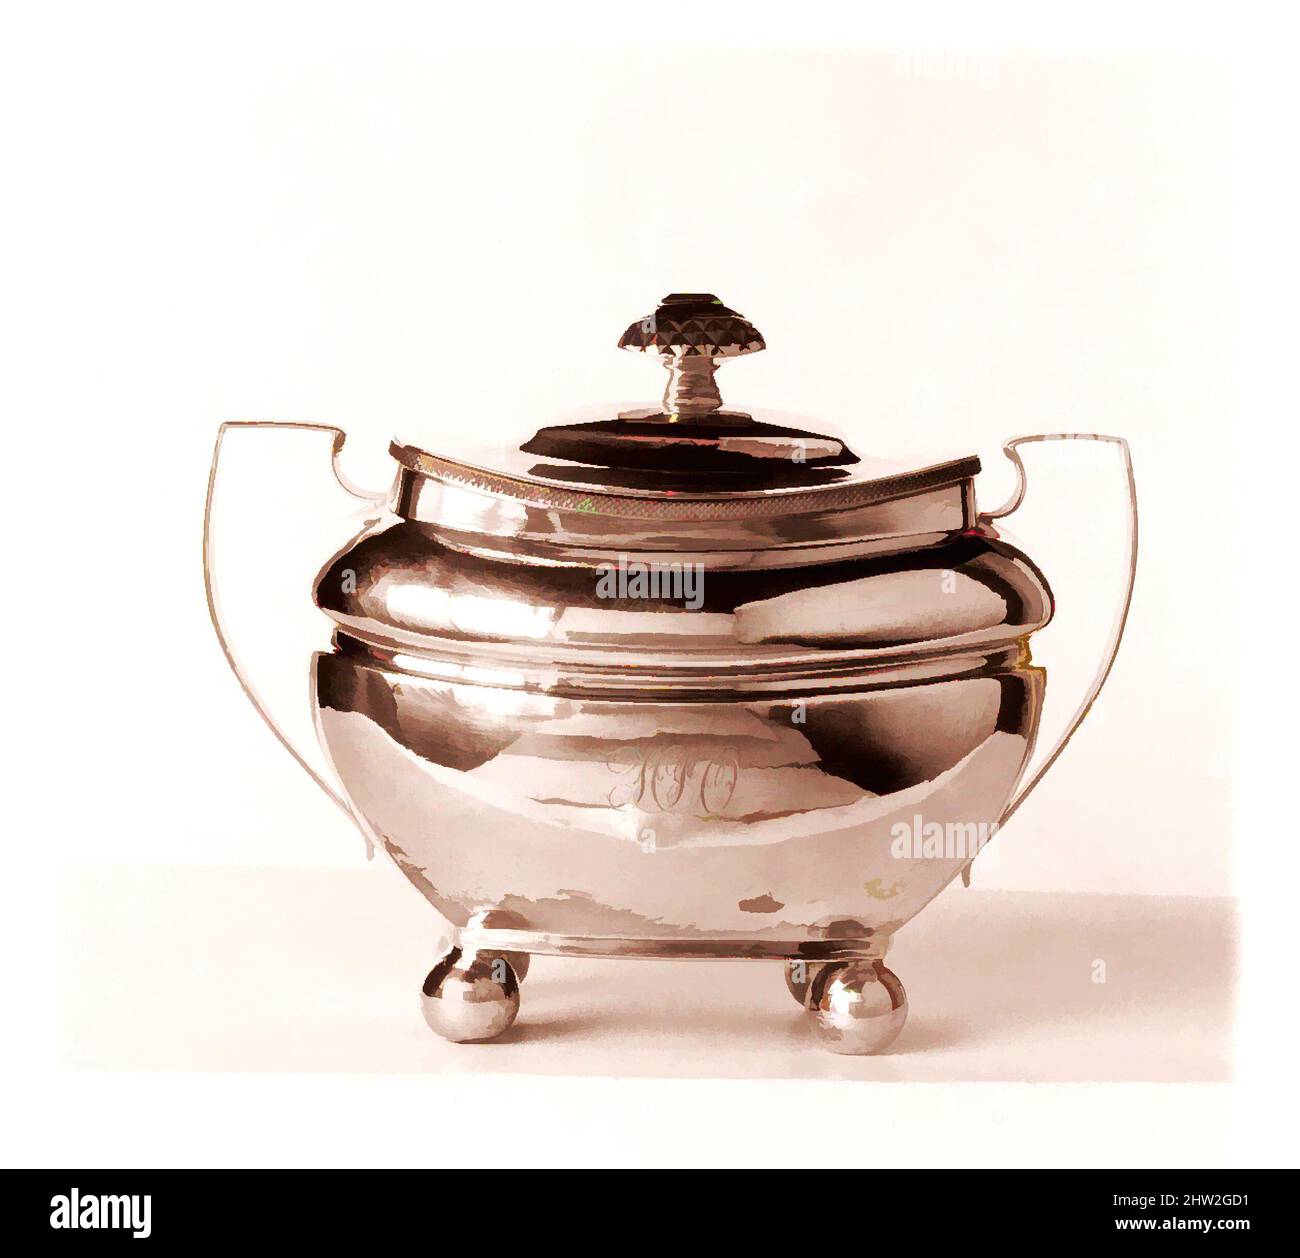 Art inspired by Sugar Bowl, ca. 1810, Made in New York, New York, United States, American, Silver, Overall: 6 1/4 x 8 x 4 15/16 in. (15.9 x 20.3 x 12.5 cm); 14 oz. 17 dwt. (462.6 g), Silver, Garret Forbes (1785–1851, Classic works modernized by Artotop with a splash of modernity. Shapes, color and value, eye-catching visual impact on art. Emotions through freedom of artworks in a contemporary way. A timeless message pursuing a wildly creative new direction. Artists turning to the digital medium and creating the Artotop NFT Stock Photo